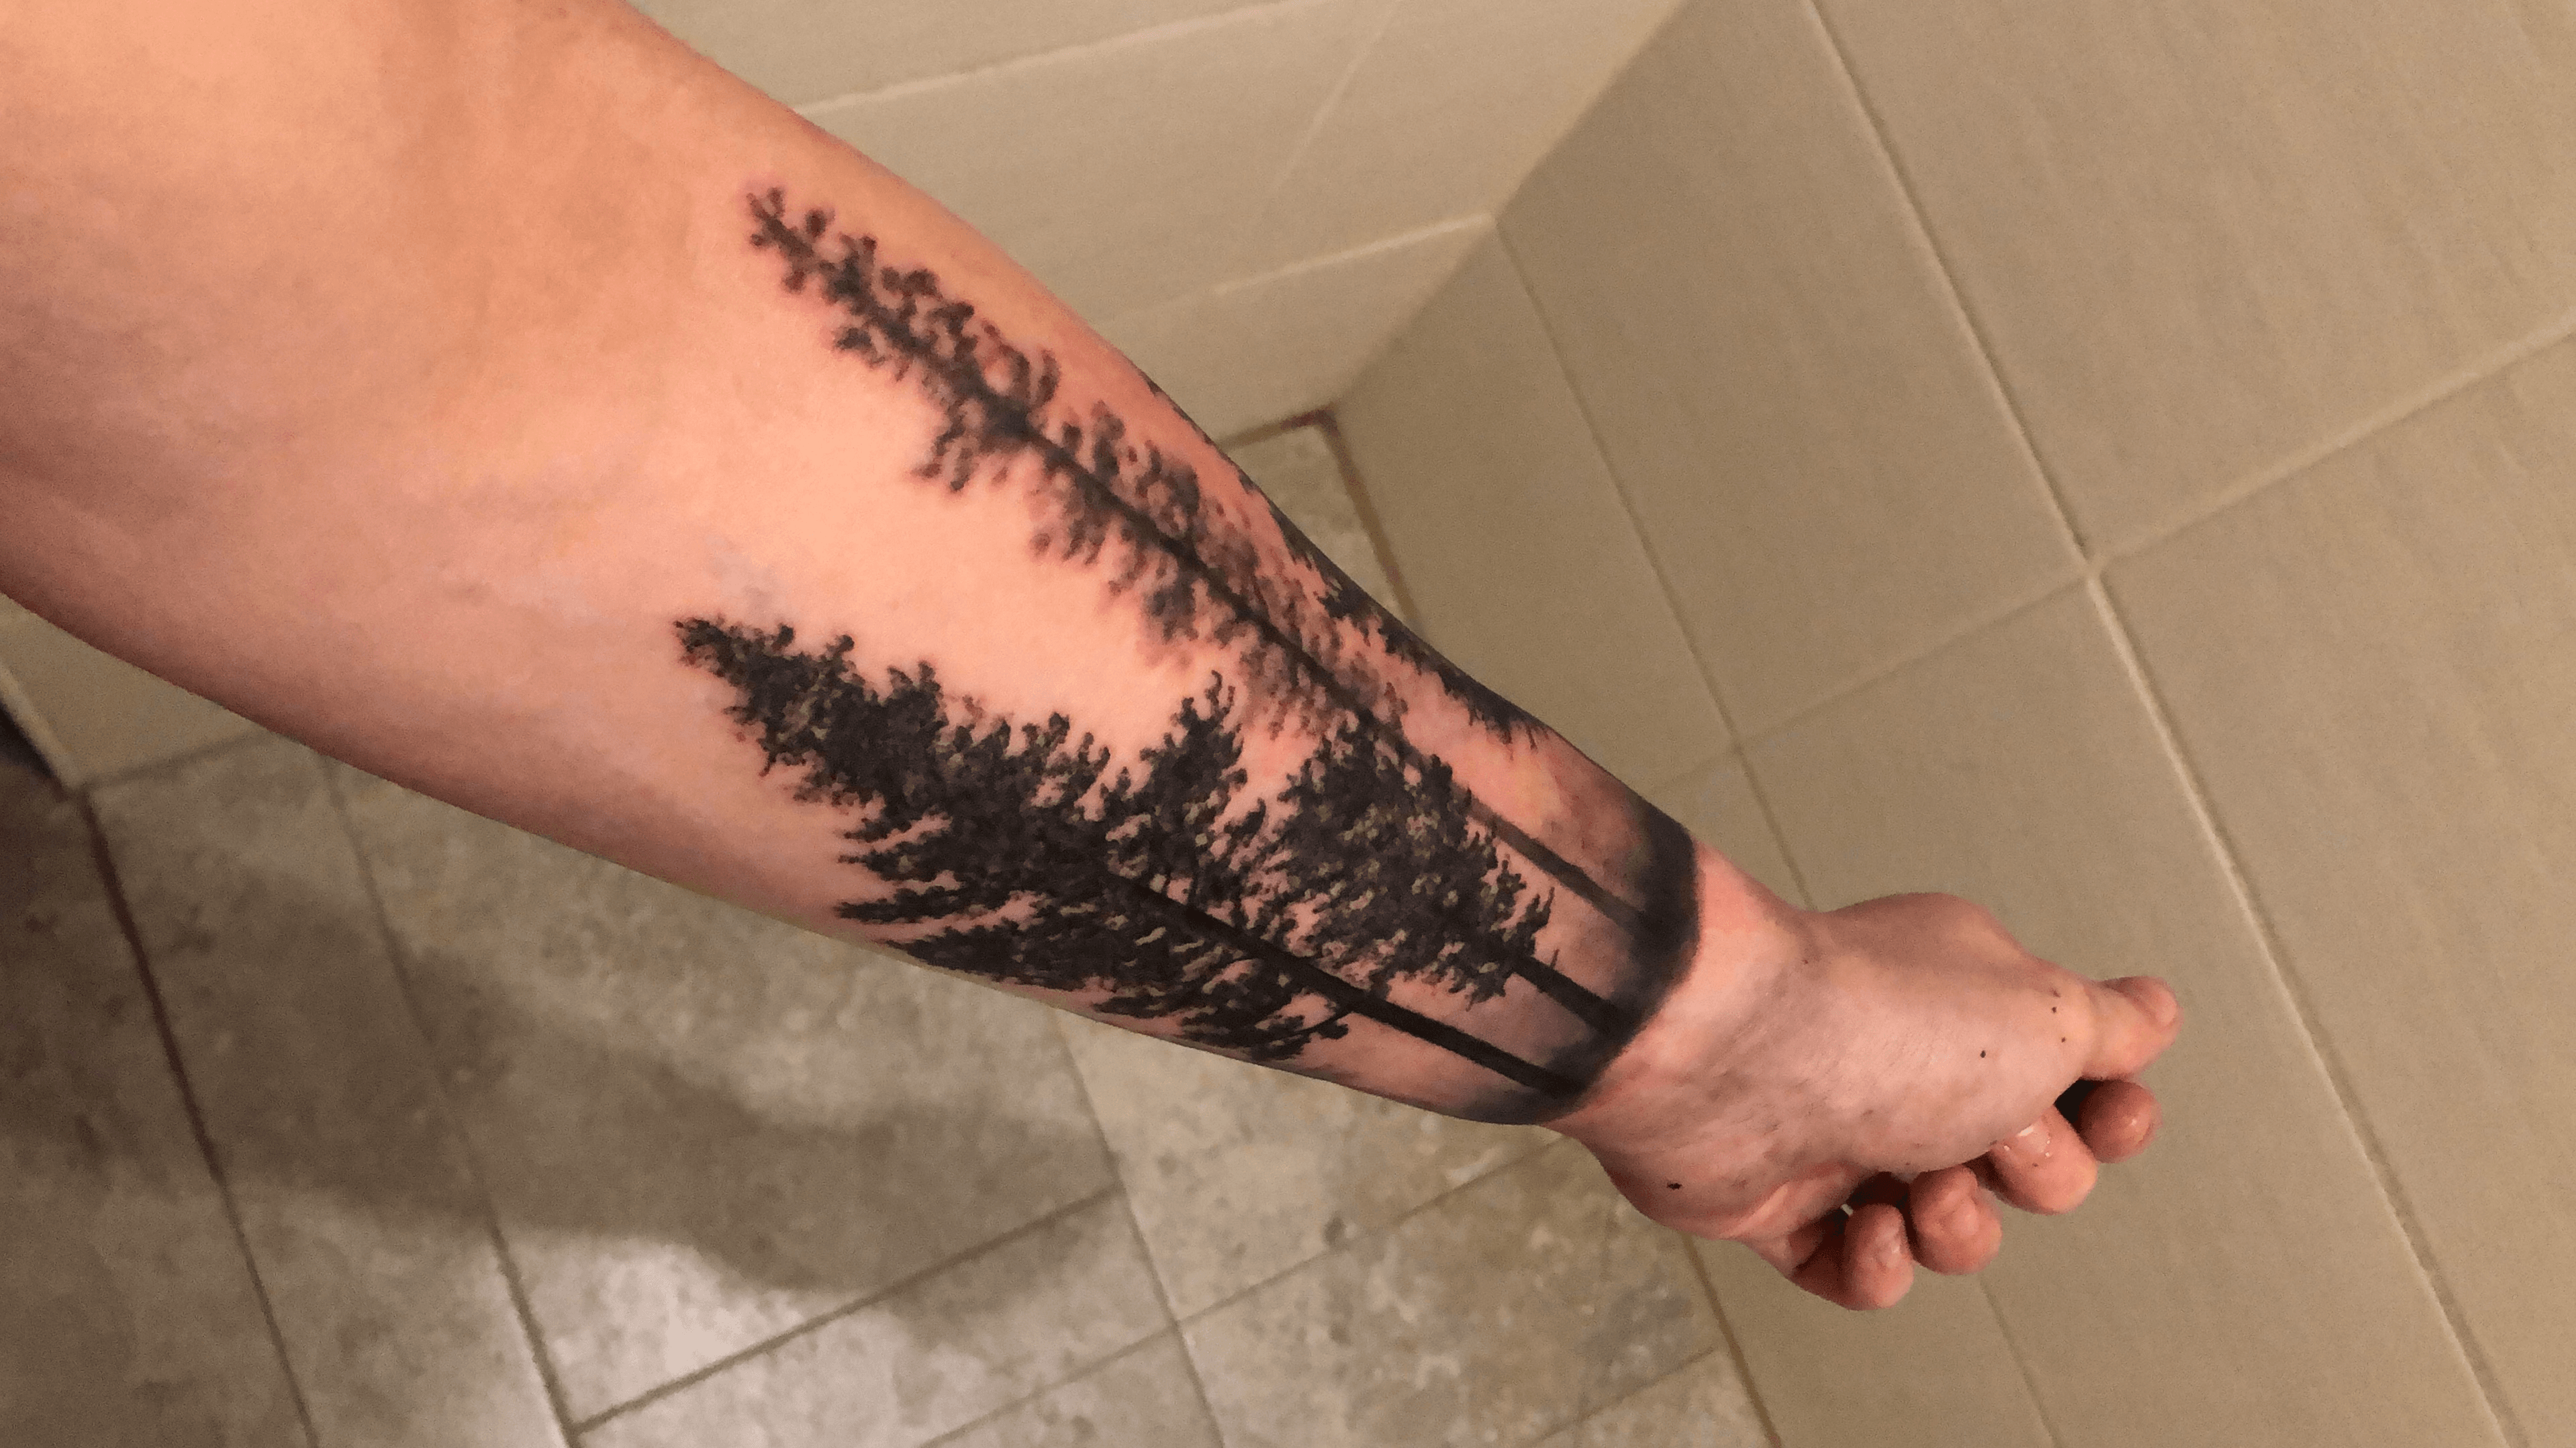 Pine tree forest tattoo on the left upper arm